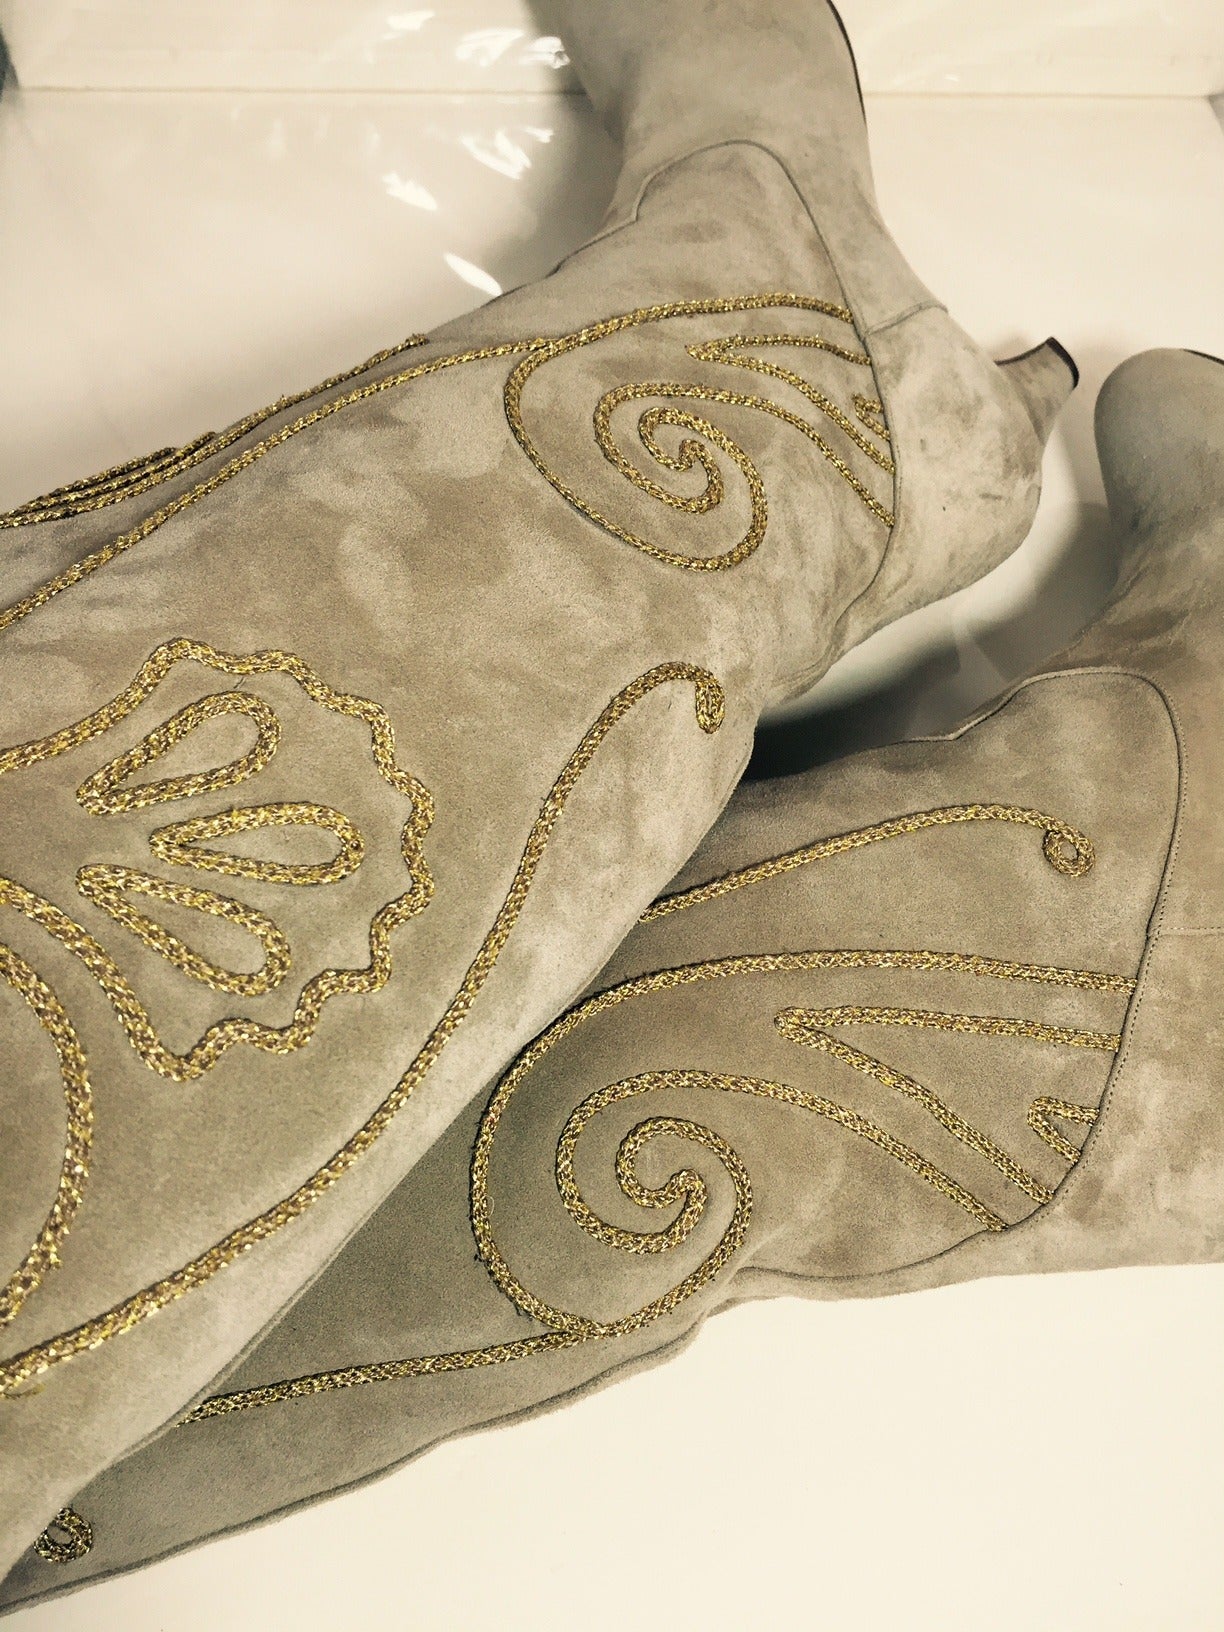 Women's 1980s Andrea Pfister Taupe Suede Western Boots w/ Gold Soutache Braid